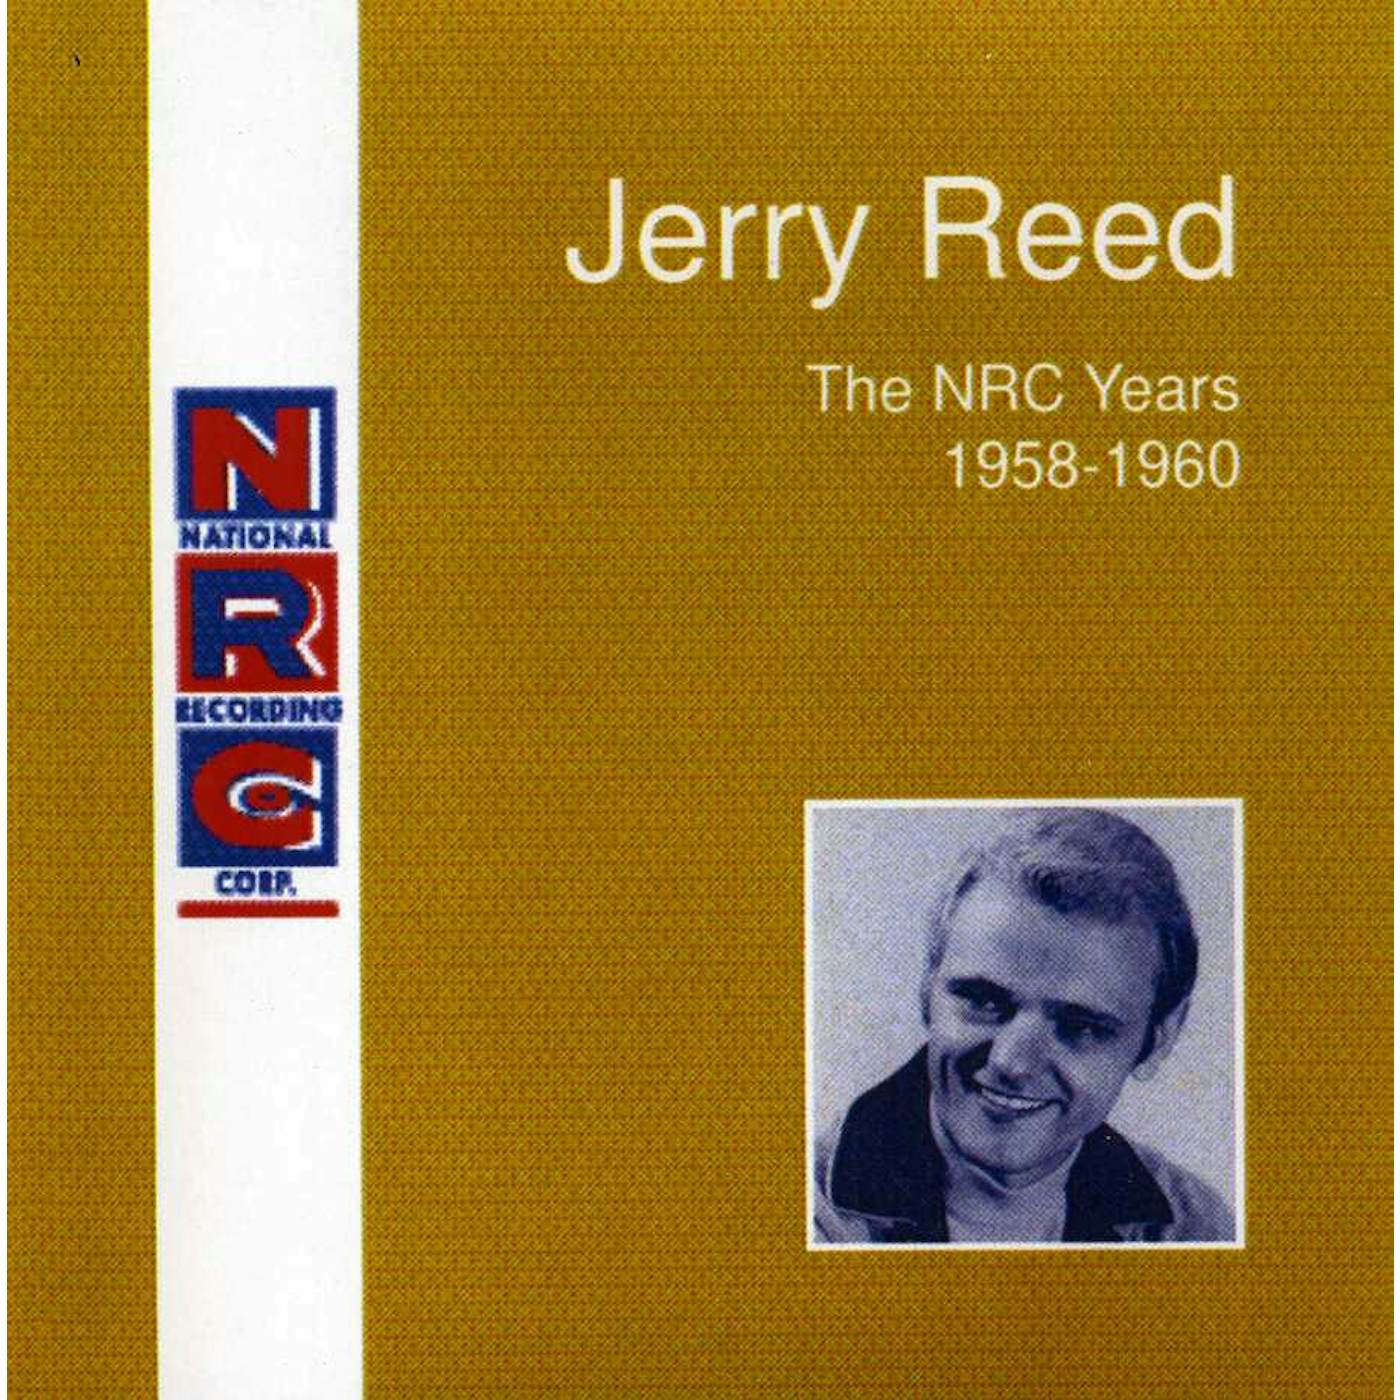 Jerry Reed NRC YEARS 1958-60 CD